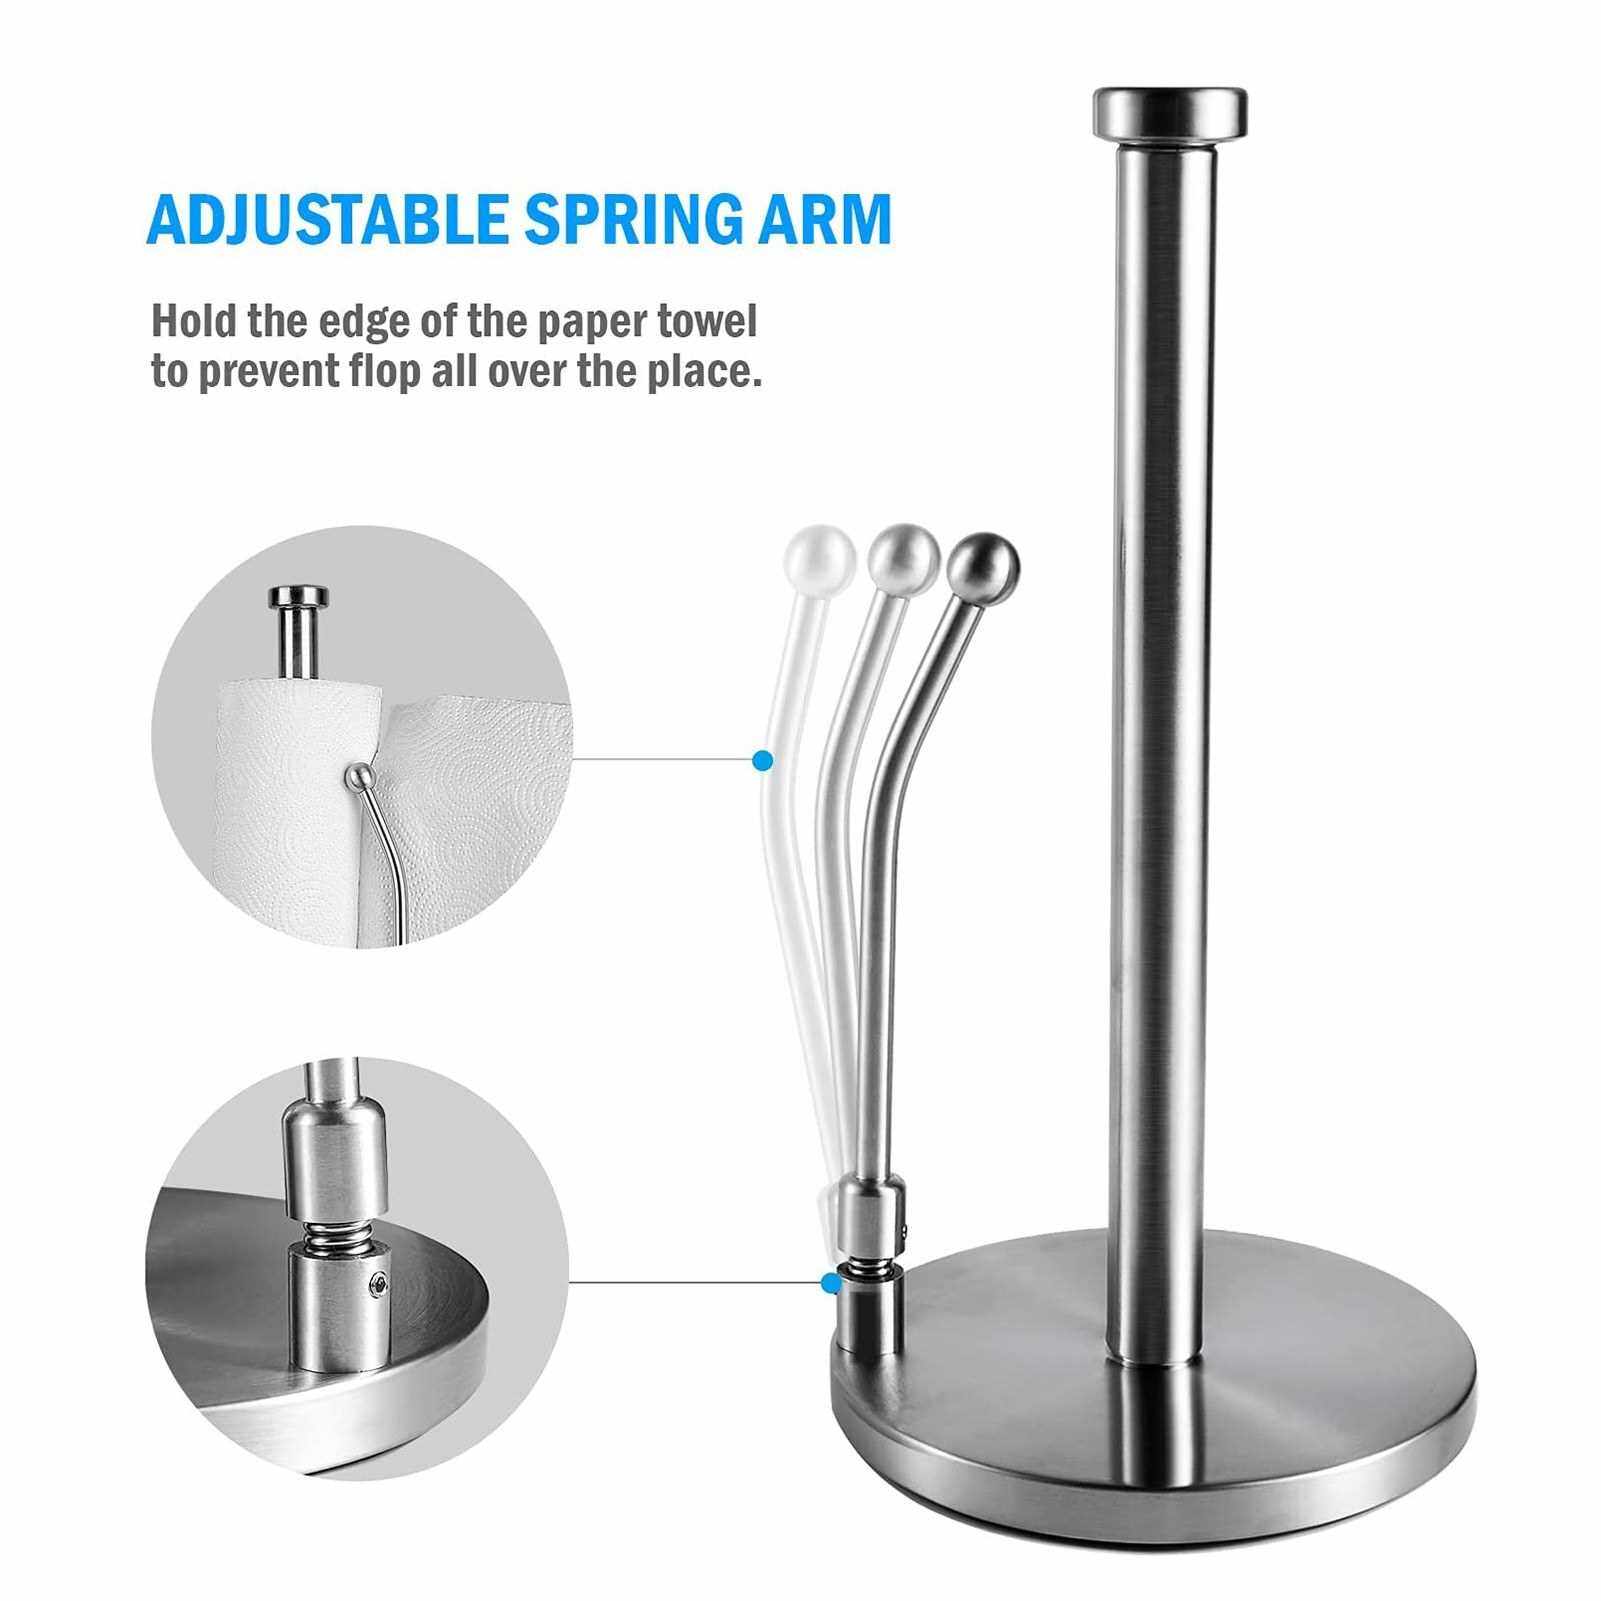 Stainless Steel Paper Towel Holder Standing Paper Towel Organizer Roll Dispenser Spring Loaded Paper Towel Holder for Kitchen Countertop Home Dining Table Silver (Standard)